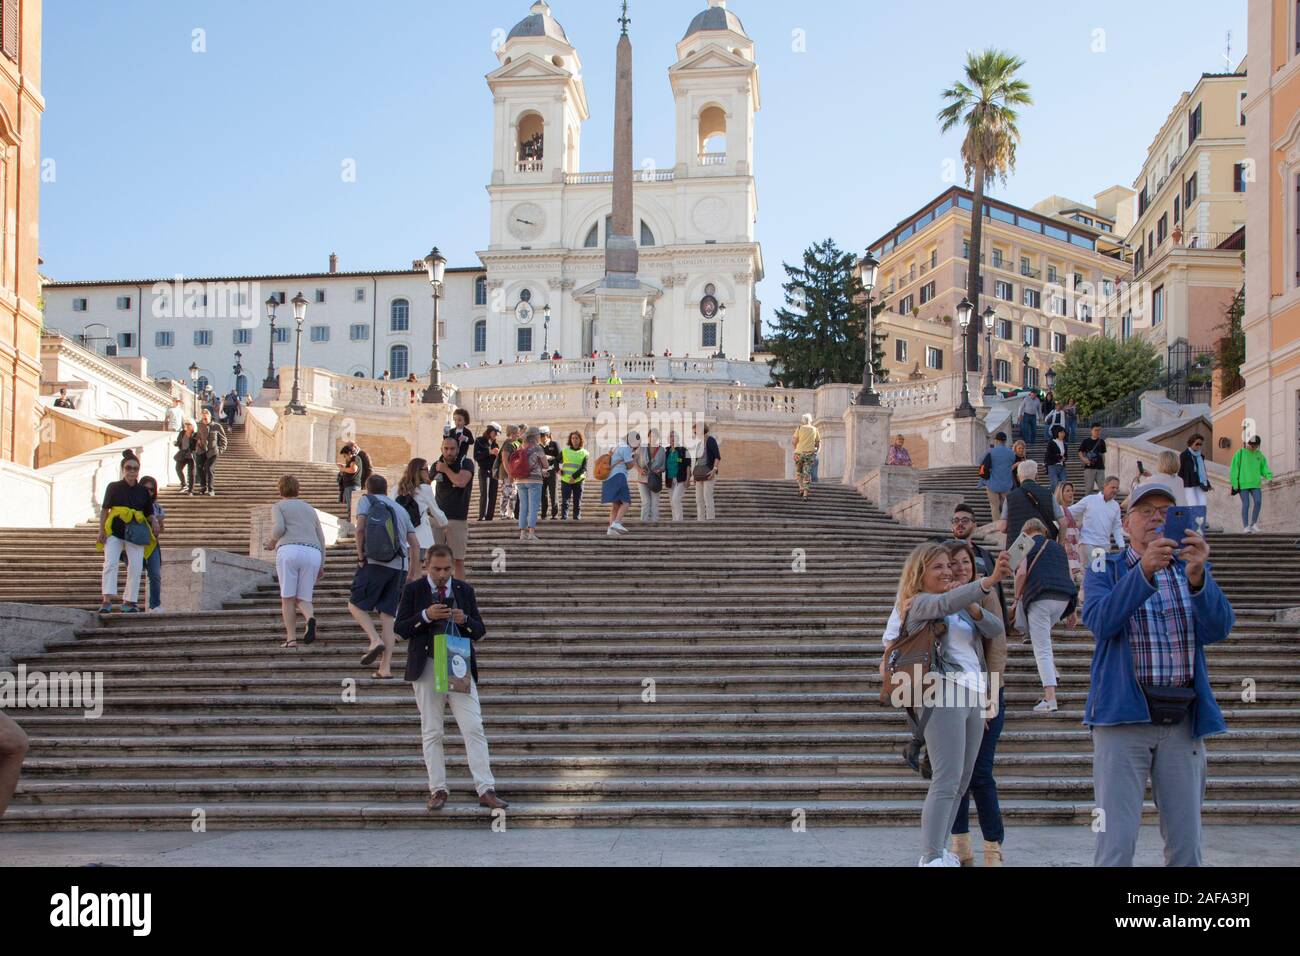 Security guards on the Spanish Steps in Rome stop tourists sitting down to avoid congestion around a popular attraction Stock Photo